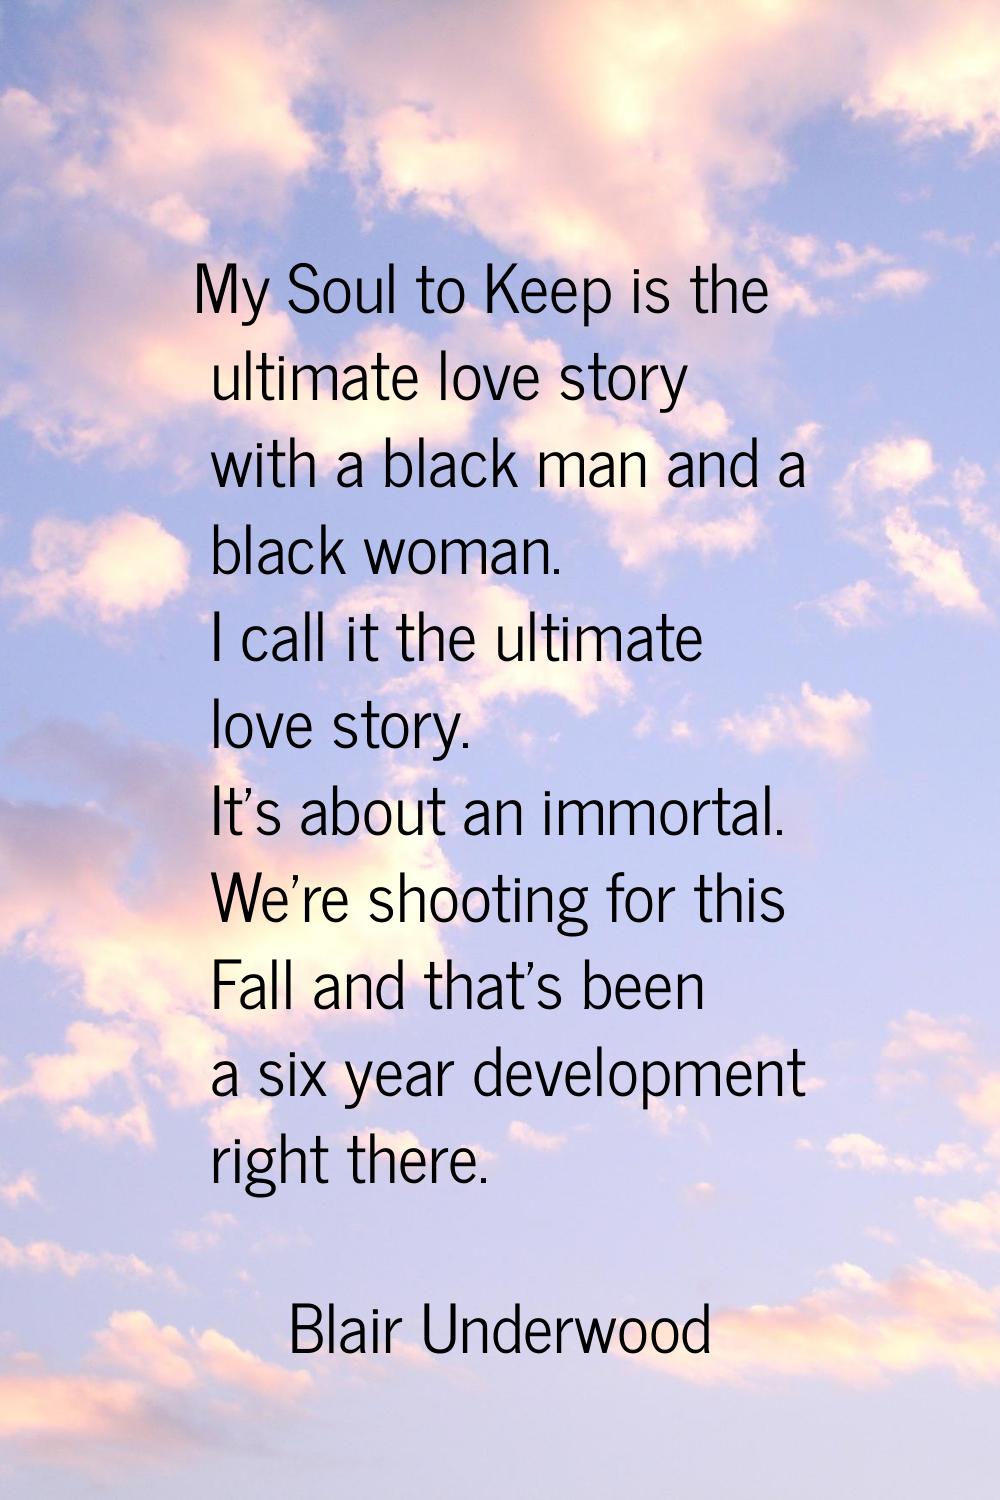 My Soul to Keep is the ultimate love story with a black man and a black woman. I call it the ultima